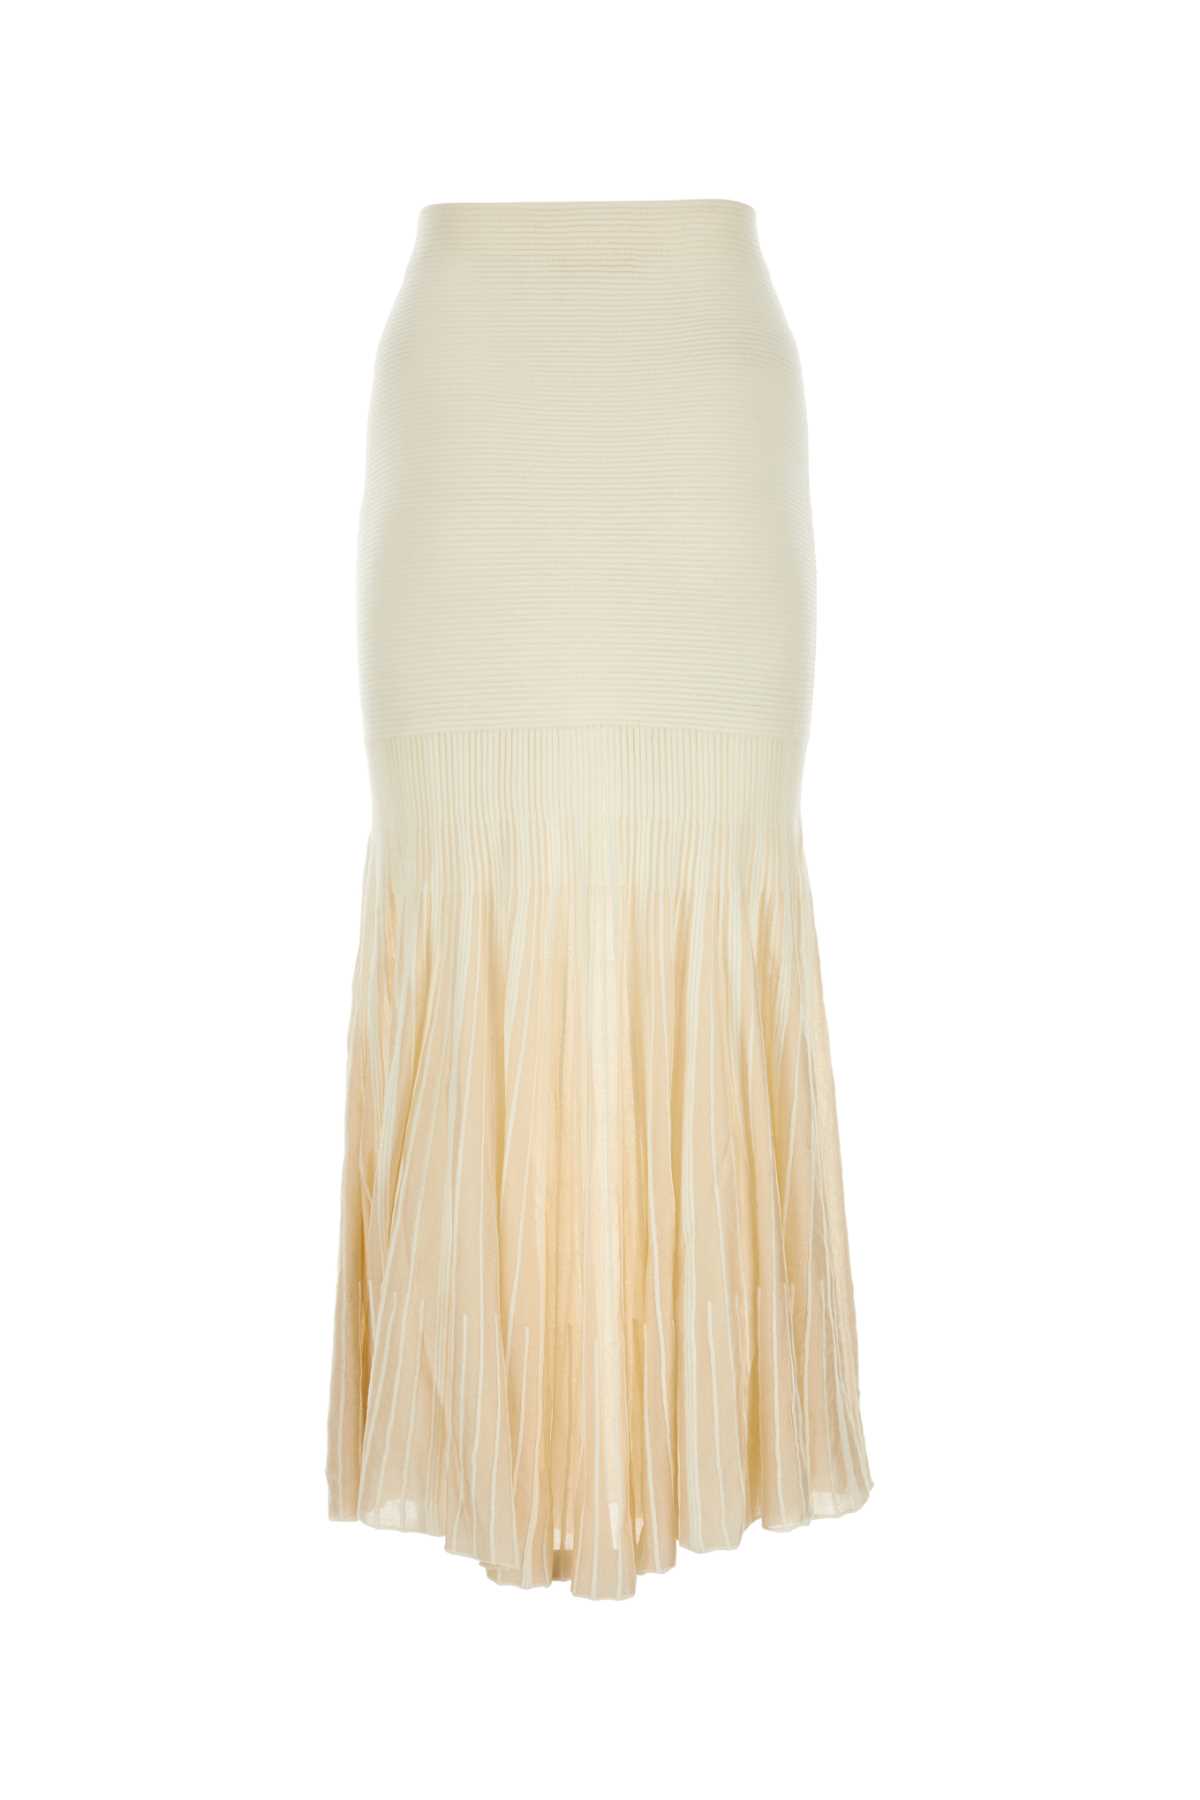 Chloé Ivory Wool Blend Skirt In Iconicmilk